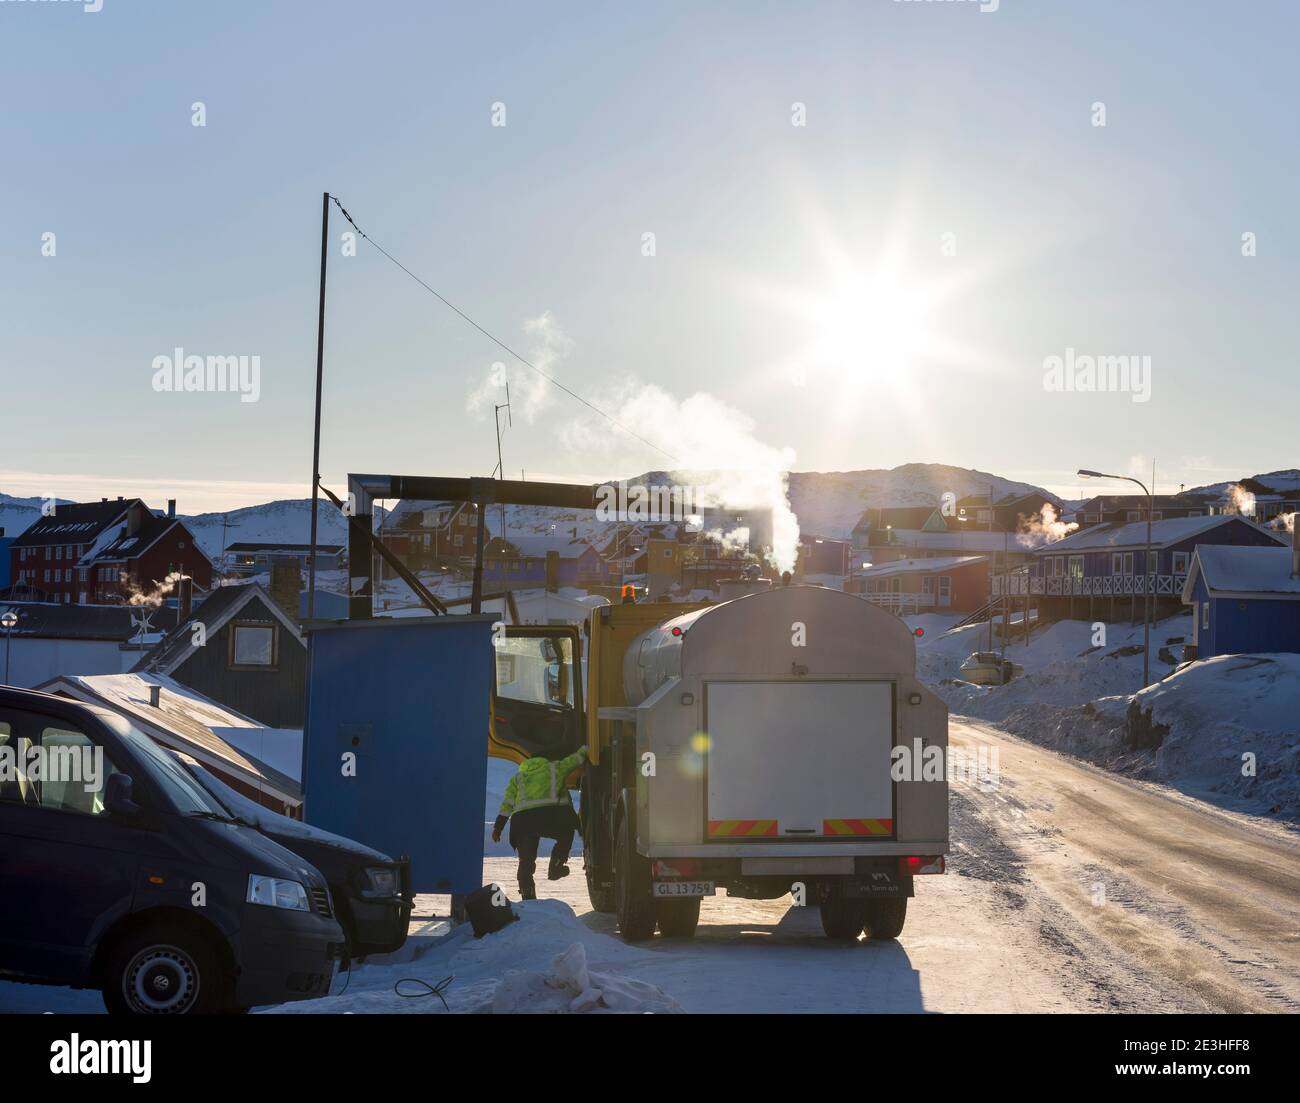 Drinking water is delivered by trucks as not all houses are connected too the water network. Winter in Ilulissat on the shore of Disko Bay. America, N Stock Photo